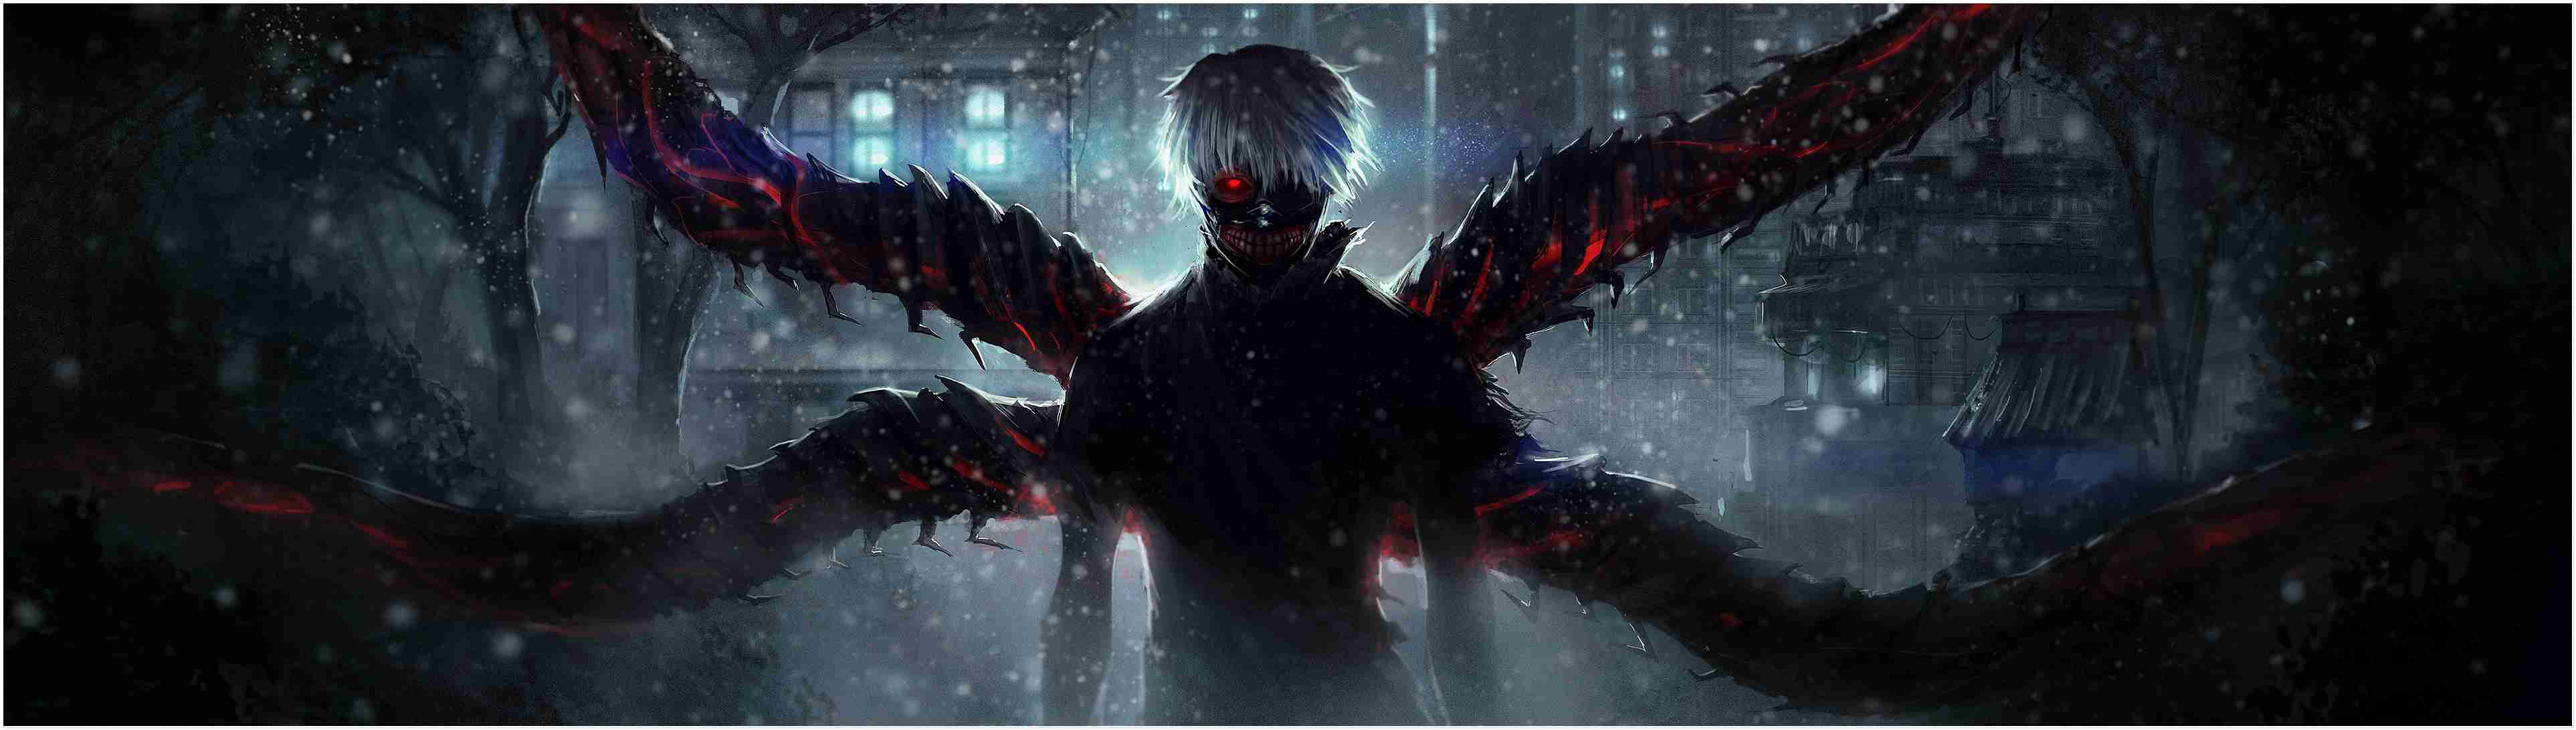 Tons Of Awesome Field Of Dual Monitor Wallpapers To - Imagenes De Tokyo Ghoul En Hd - HD Wallpaper 